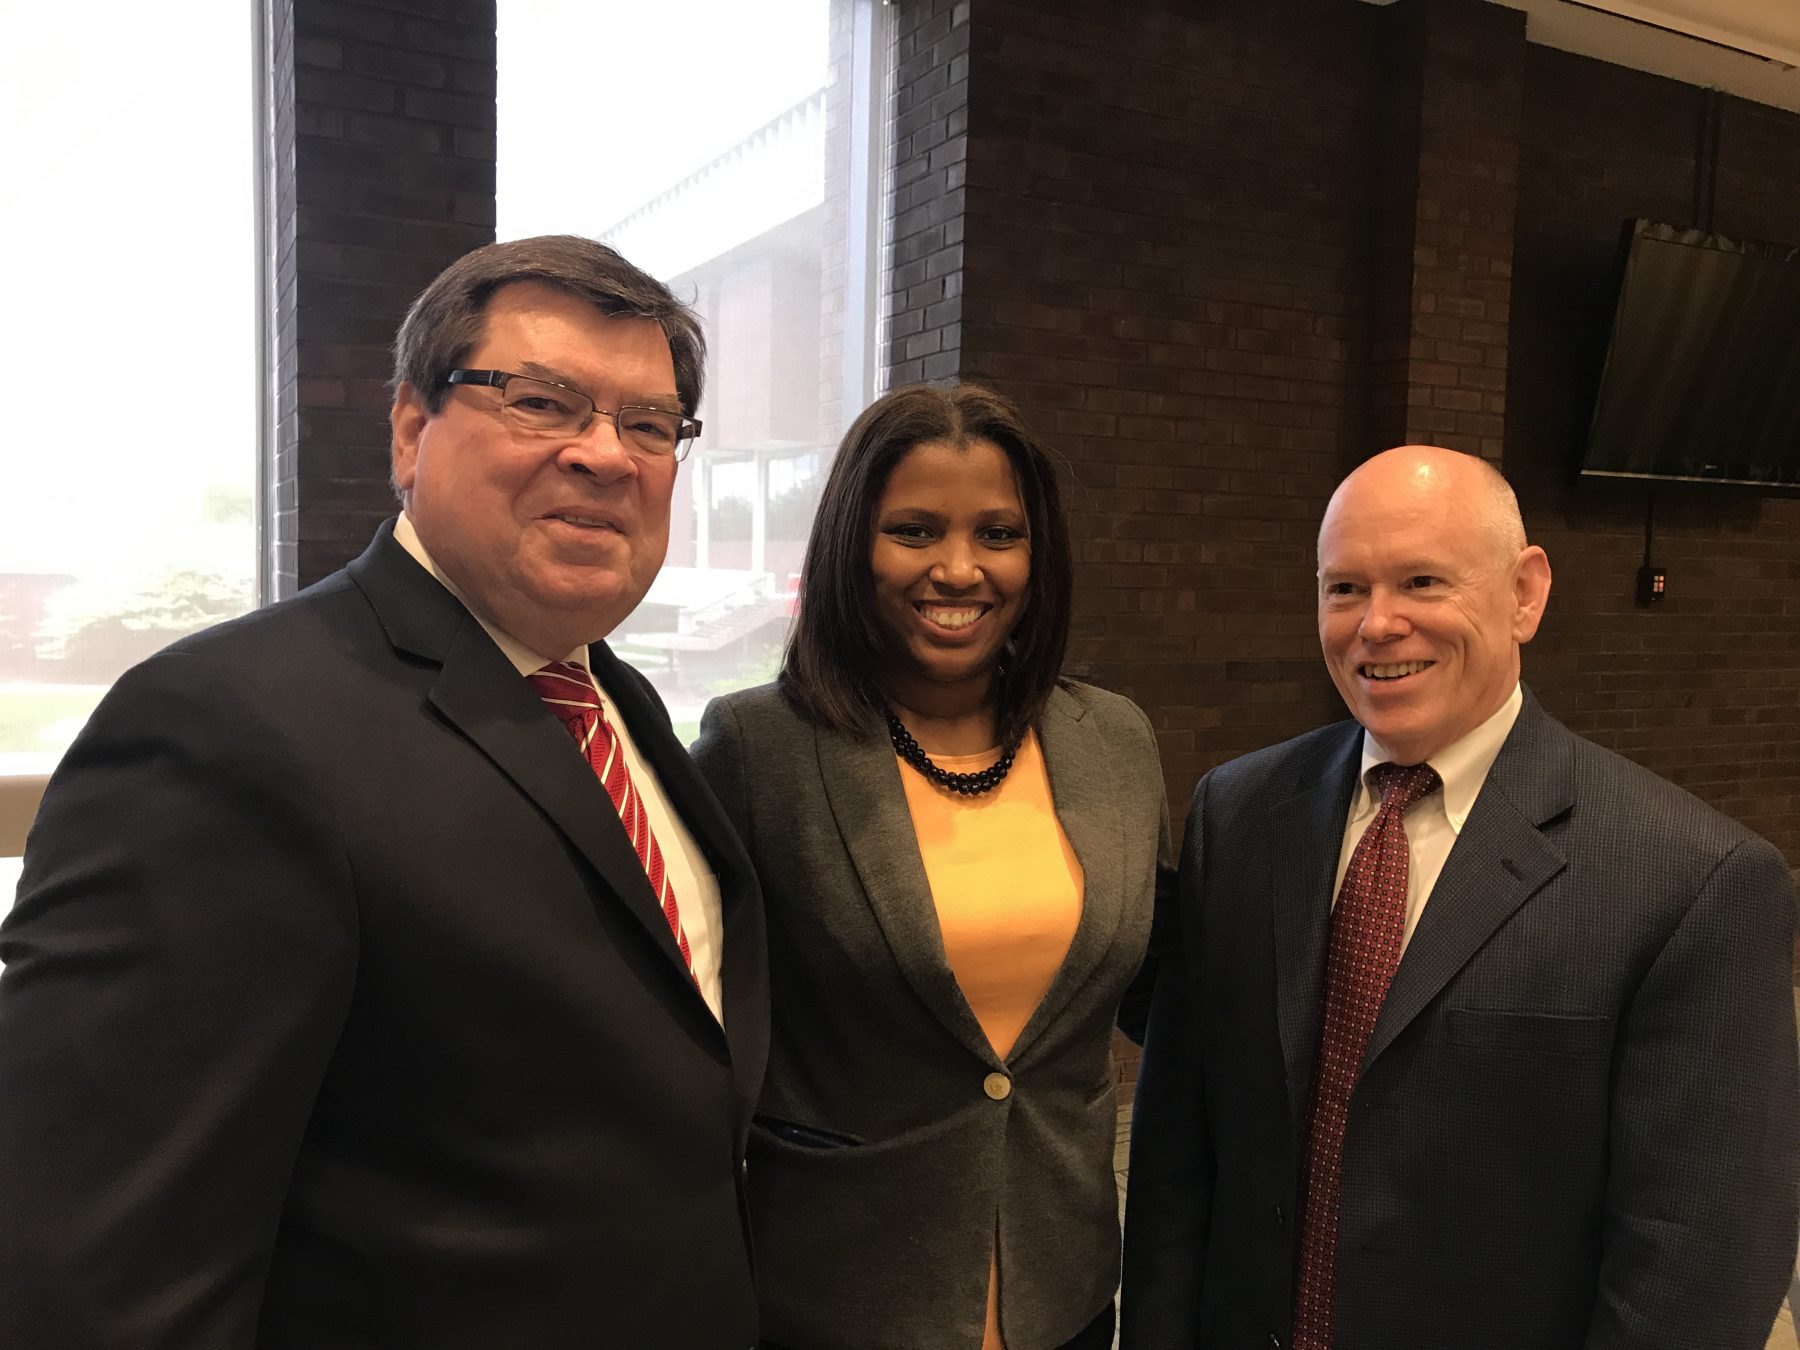 Professors Tiffany Puckett and Thomas McClure (right) with President Larry Dietz